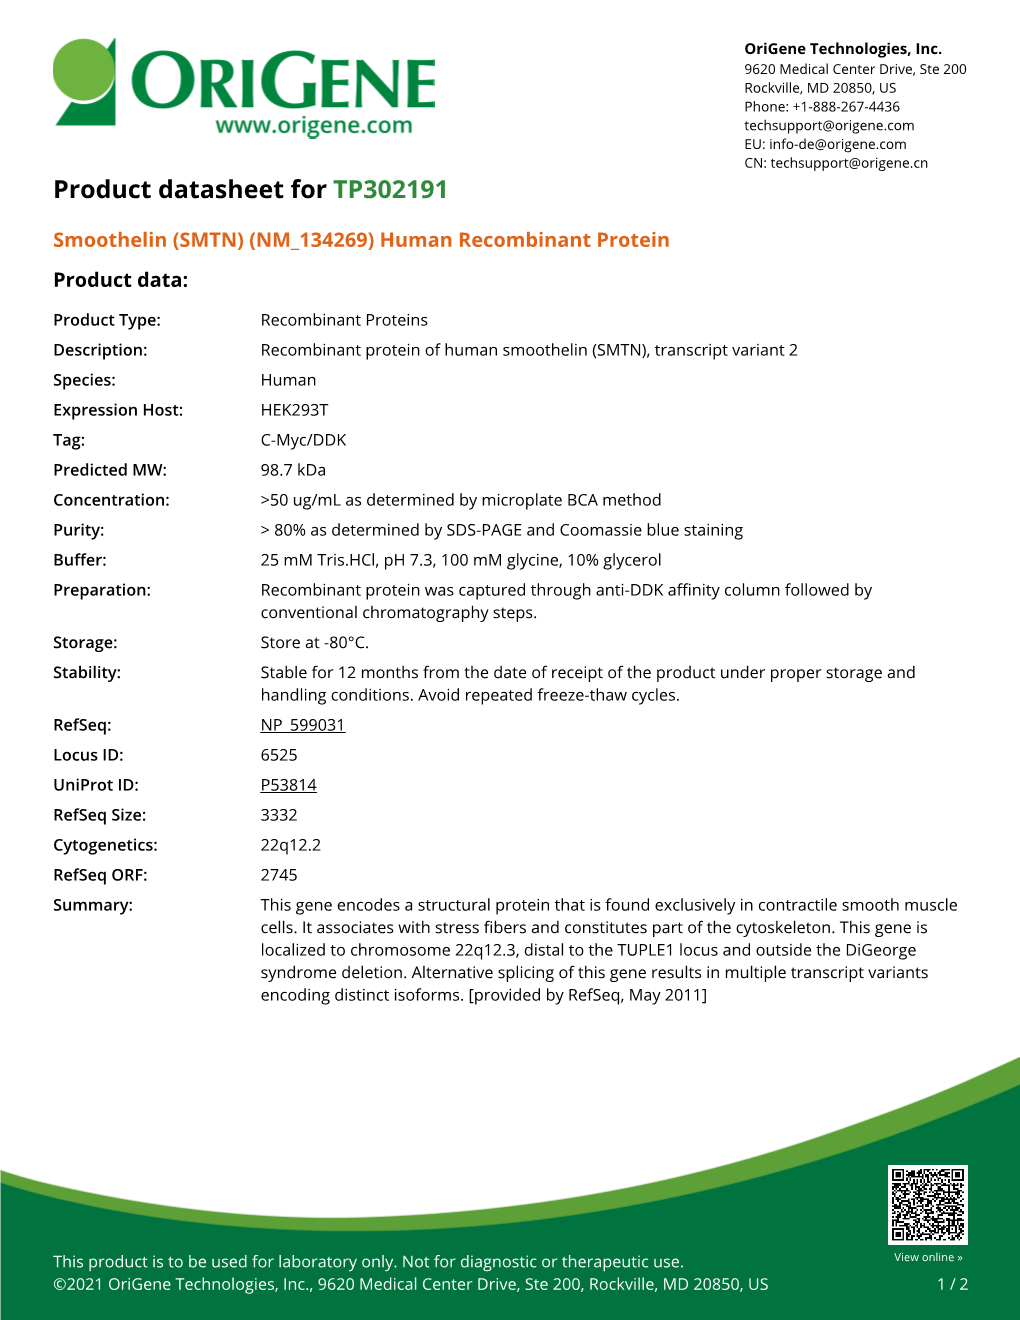 Smoothelin (SMTN) (NM 134269) Human Recombinant Protein Product Data